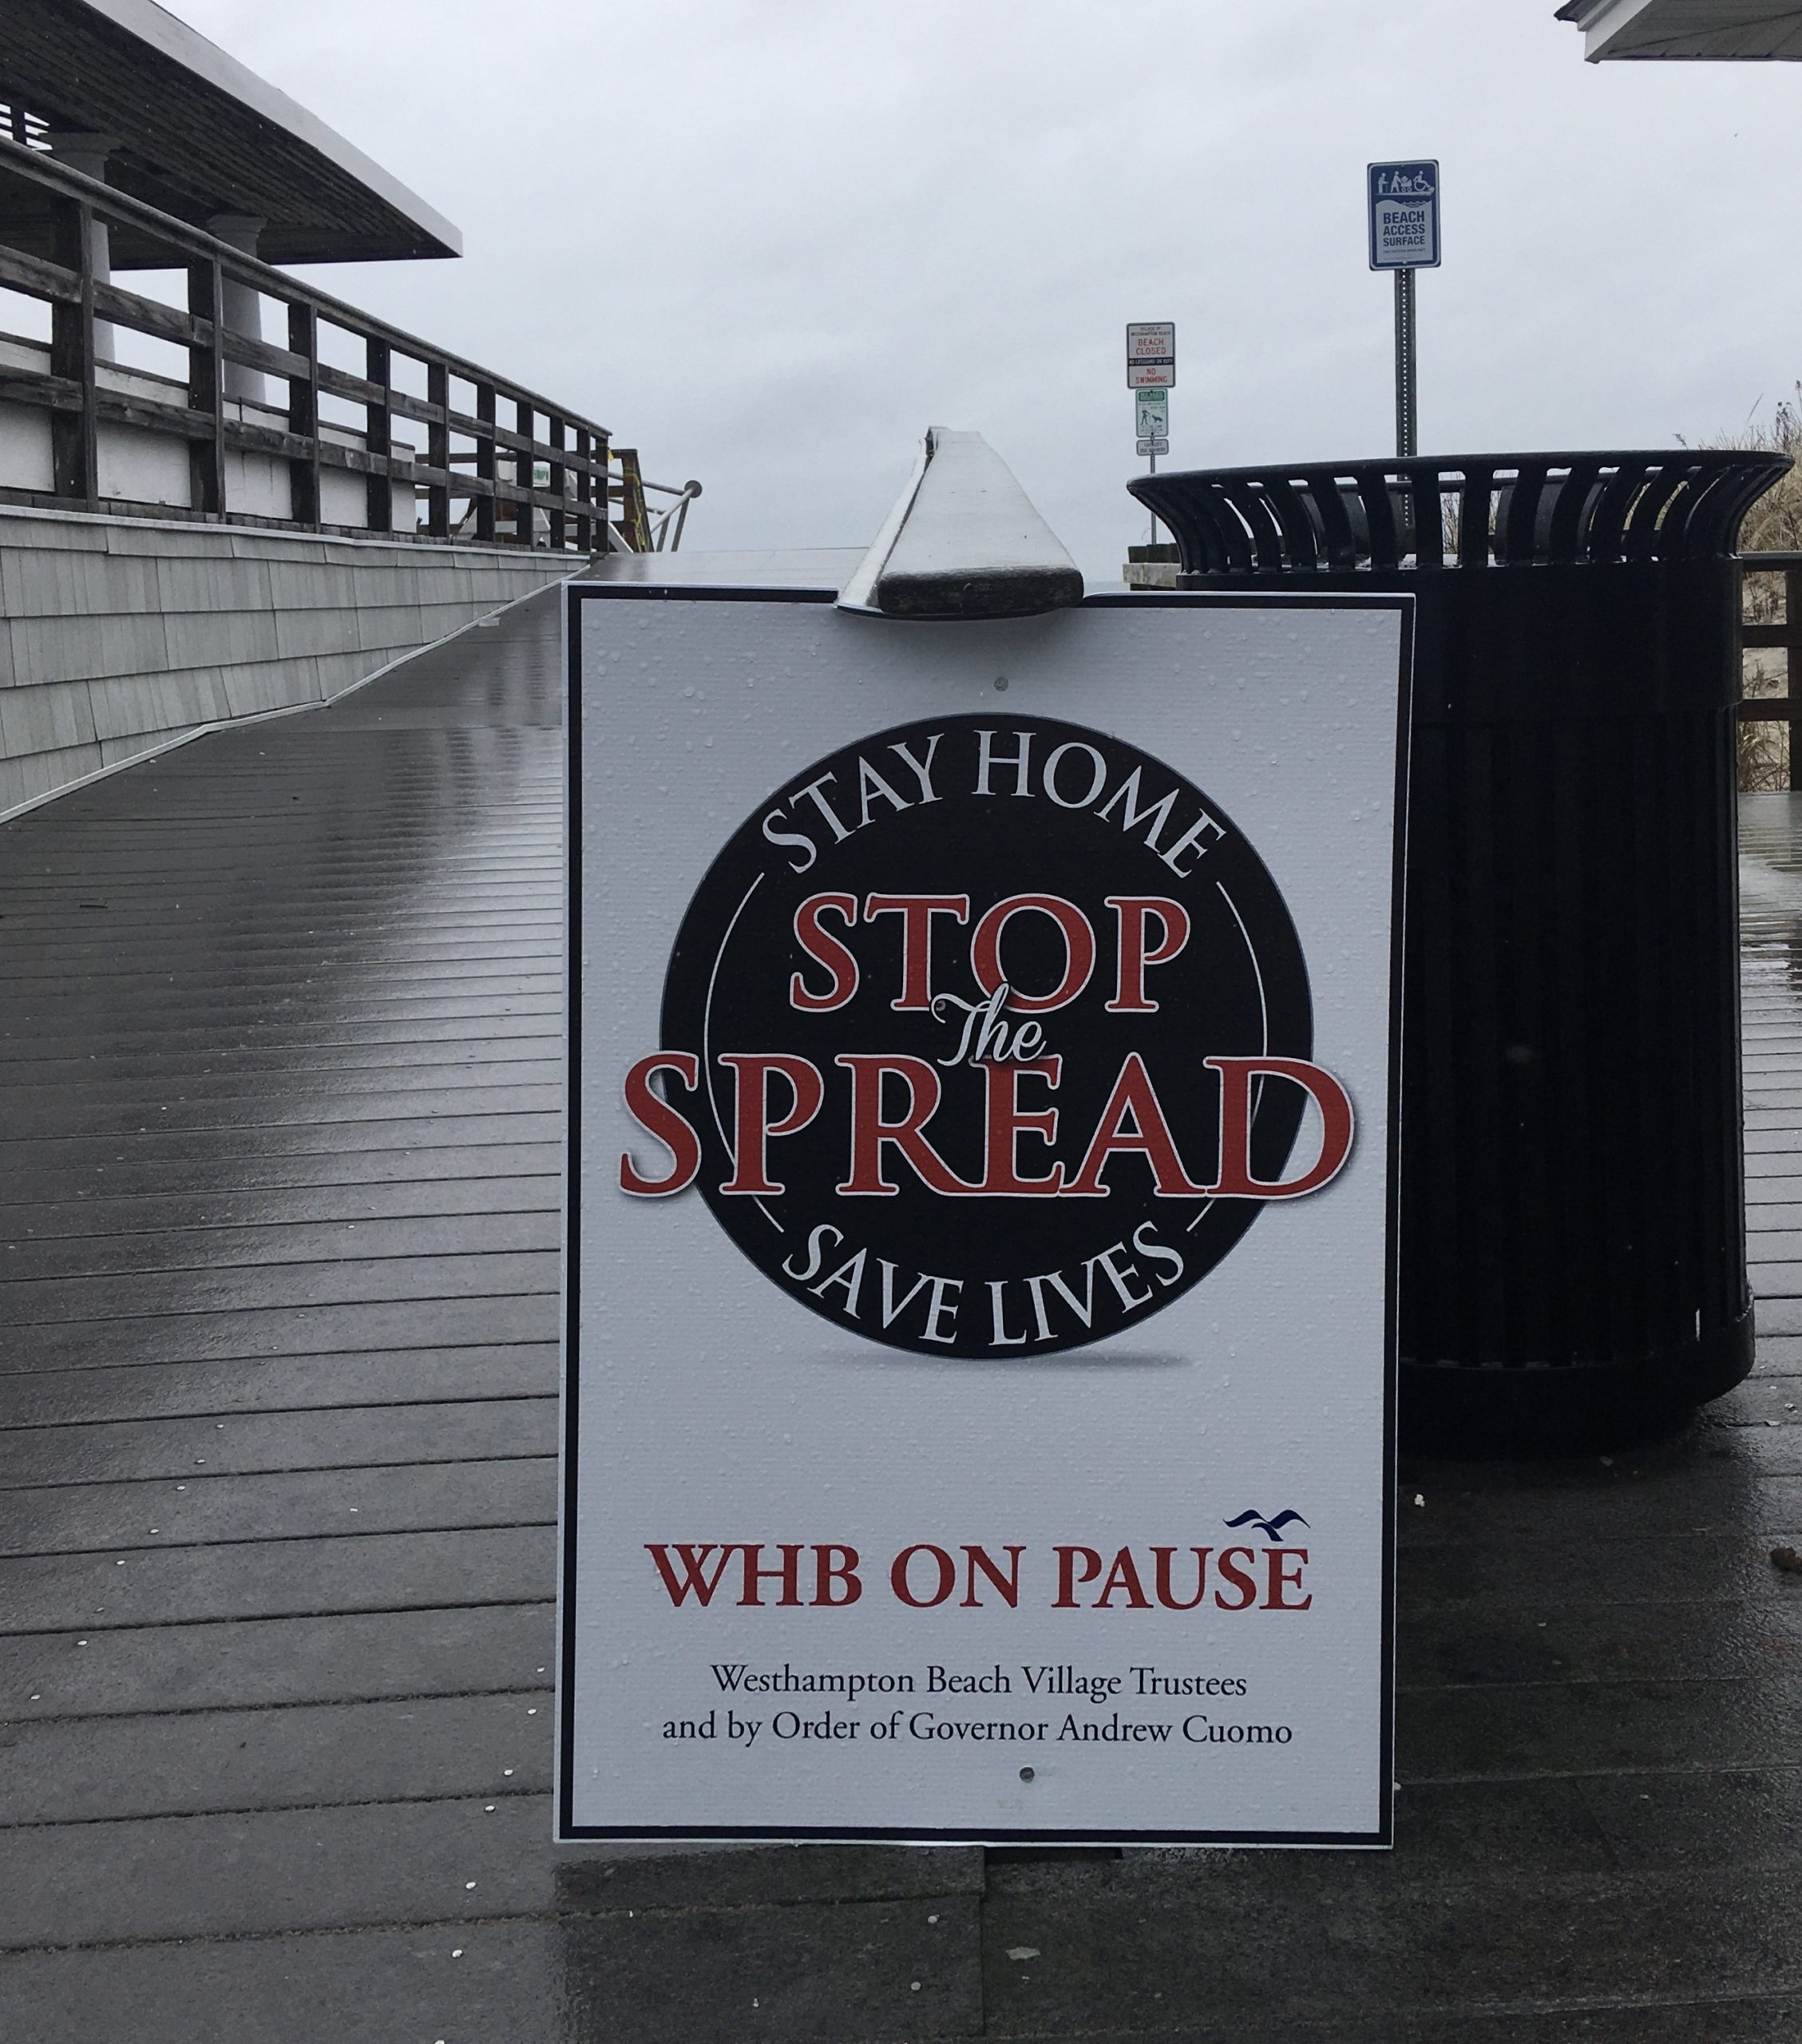 In the Village of Westhampton Beach, signs encourage visitors to the beaches and parks to comply with the New York PAUSE order. 